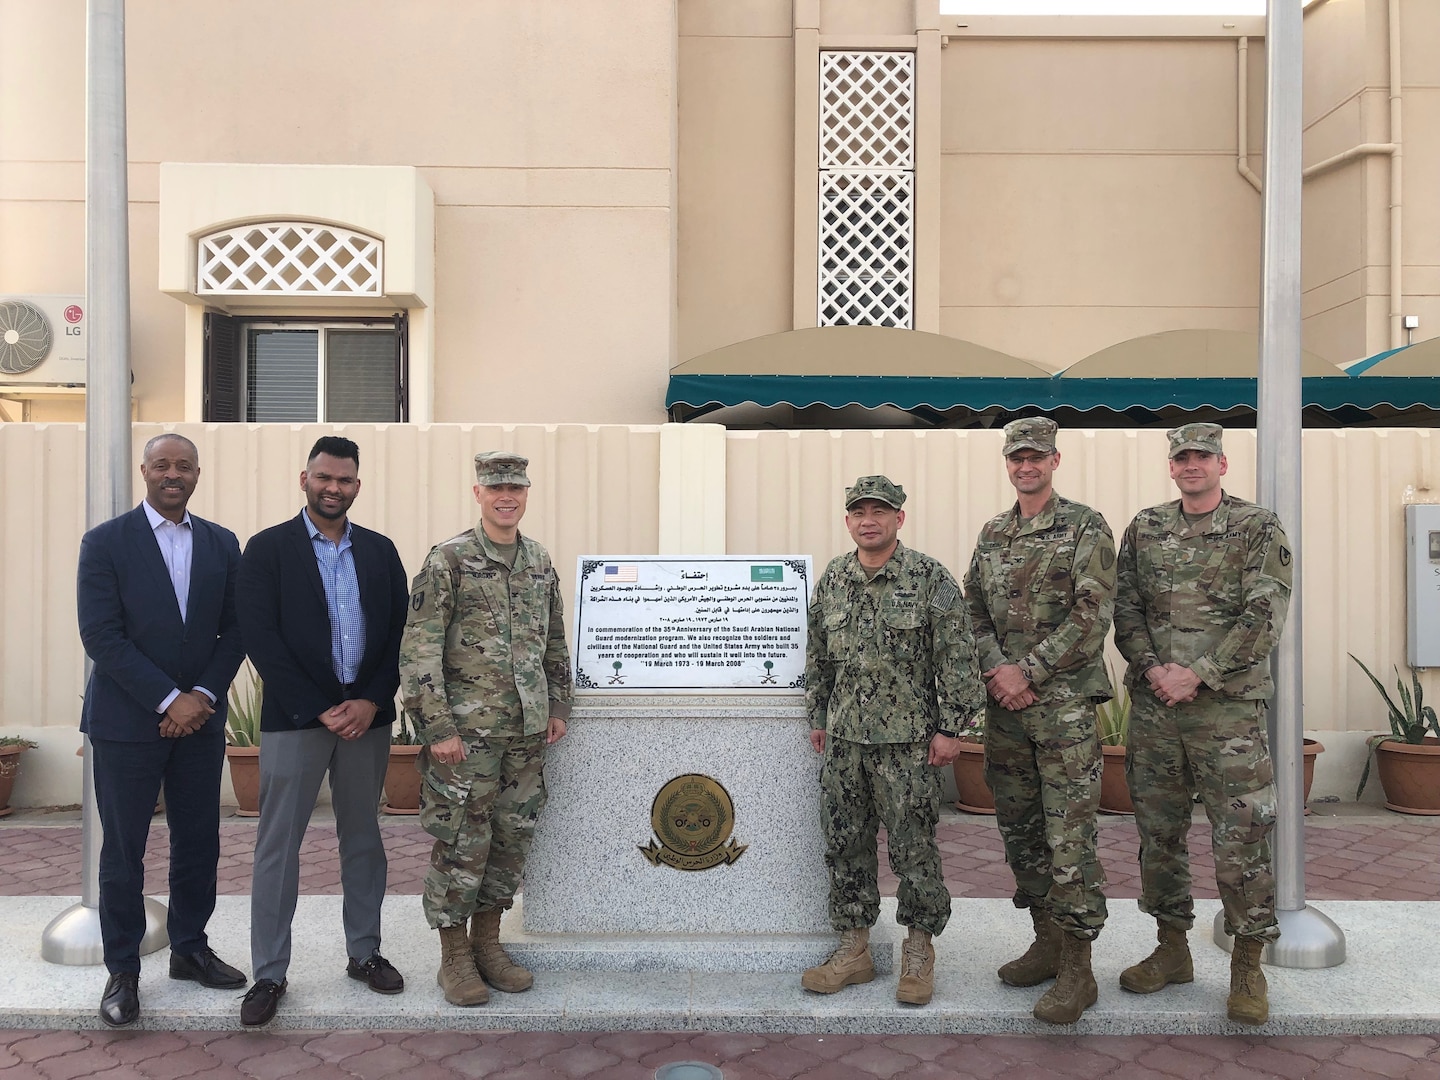 Peter Skillings, DLA Troop Support Medical’s Collective and Foreign Military Sales branch chief, left, and Abin Mathai, DLA Troop Support Medical’s Dressing, Tools and Instruments integrated support team chief, second to left, pose for a photo in Riyadh, Saudi Arabia May 2019.